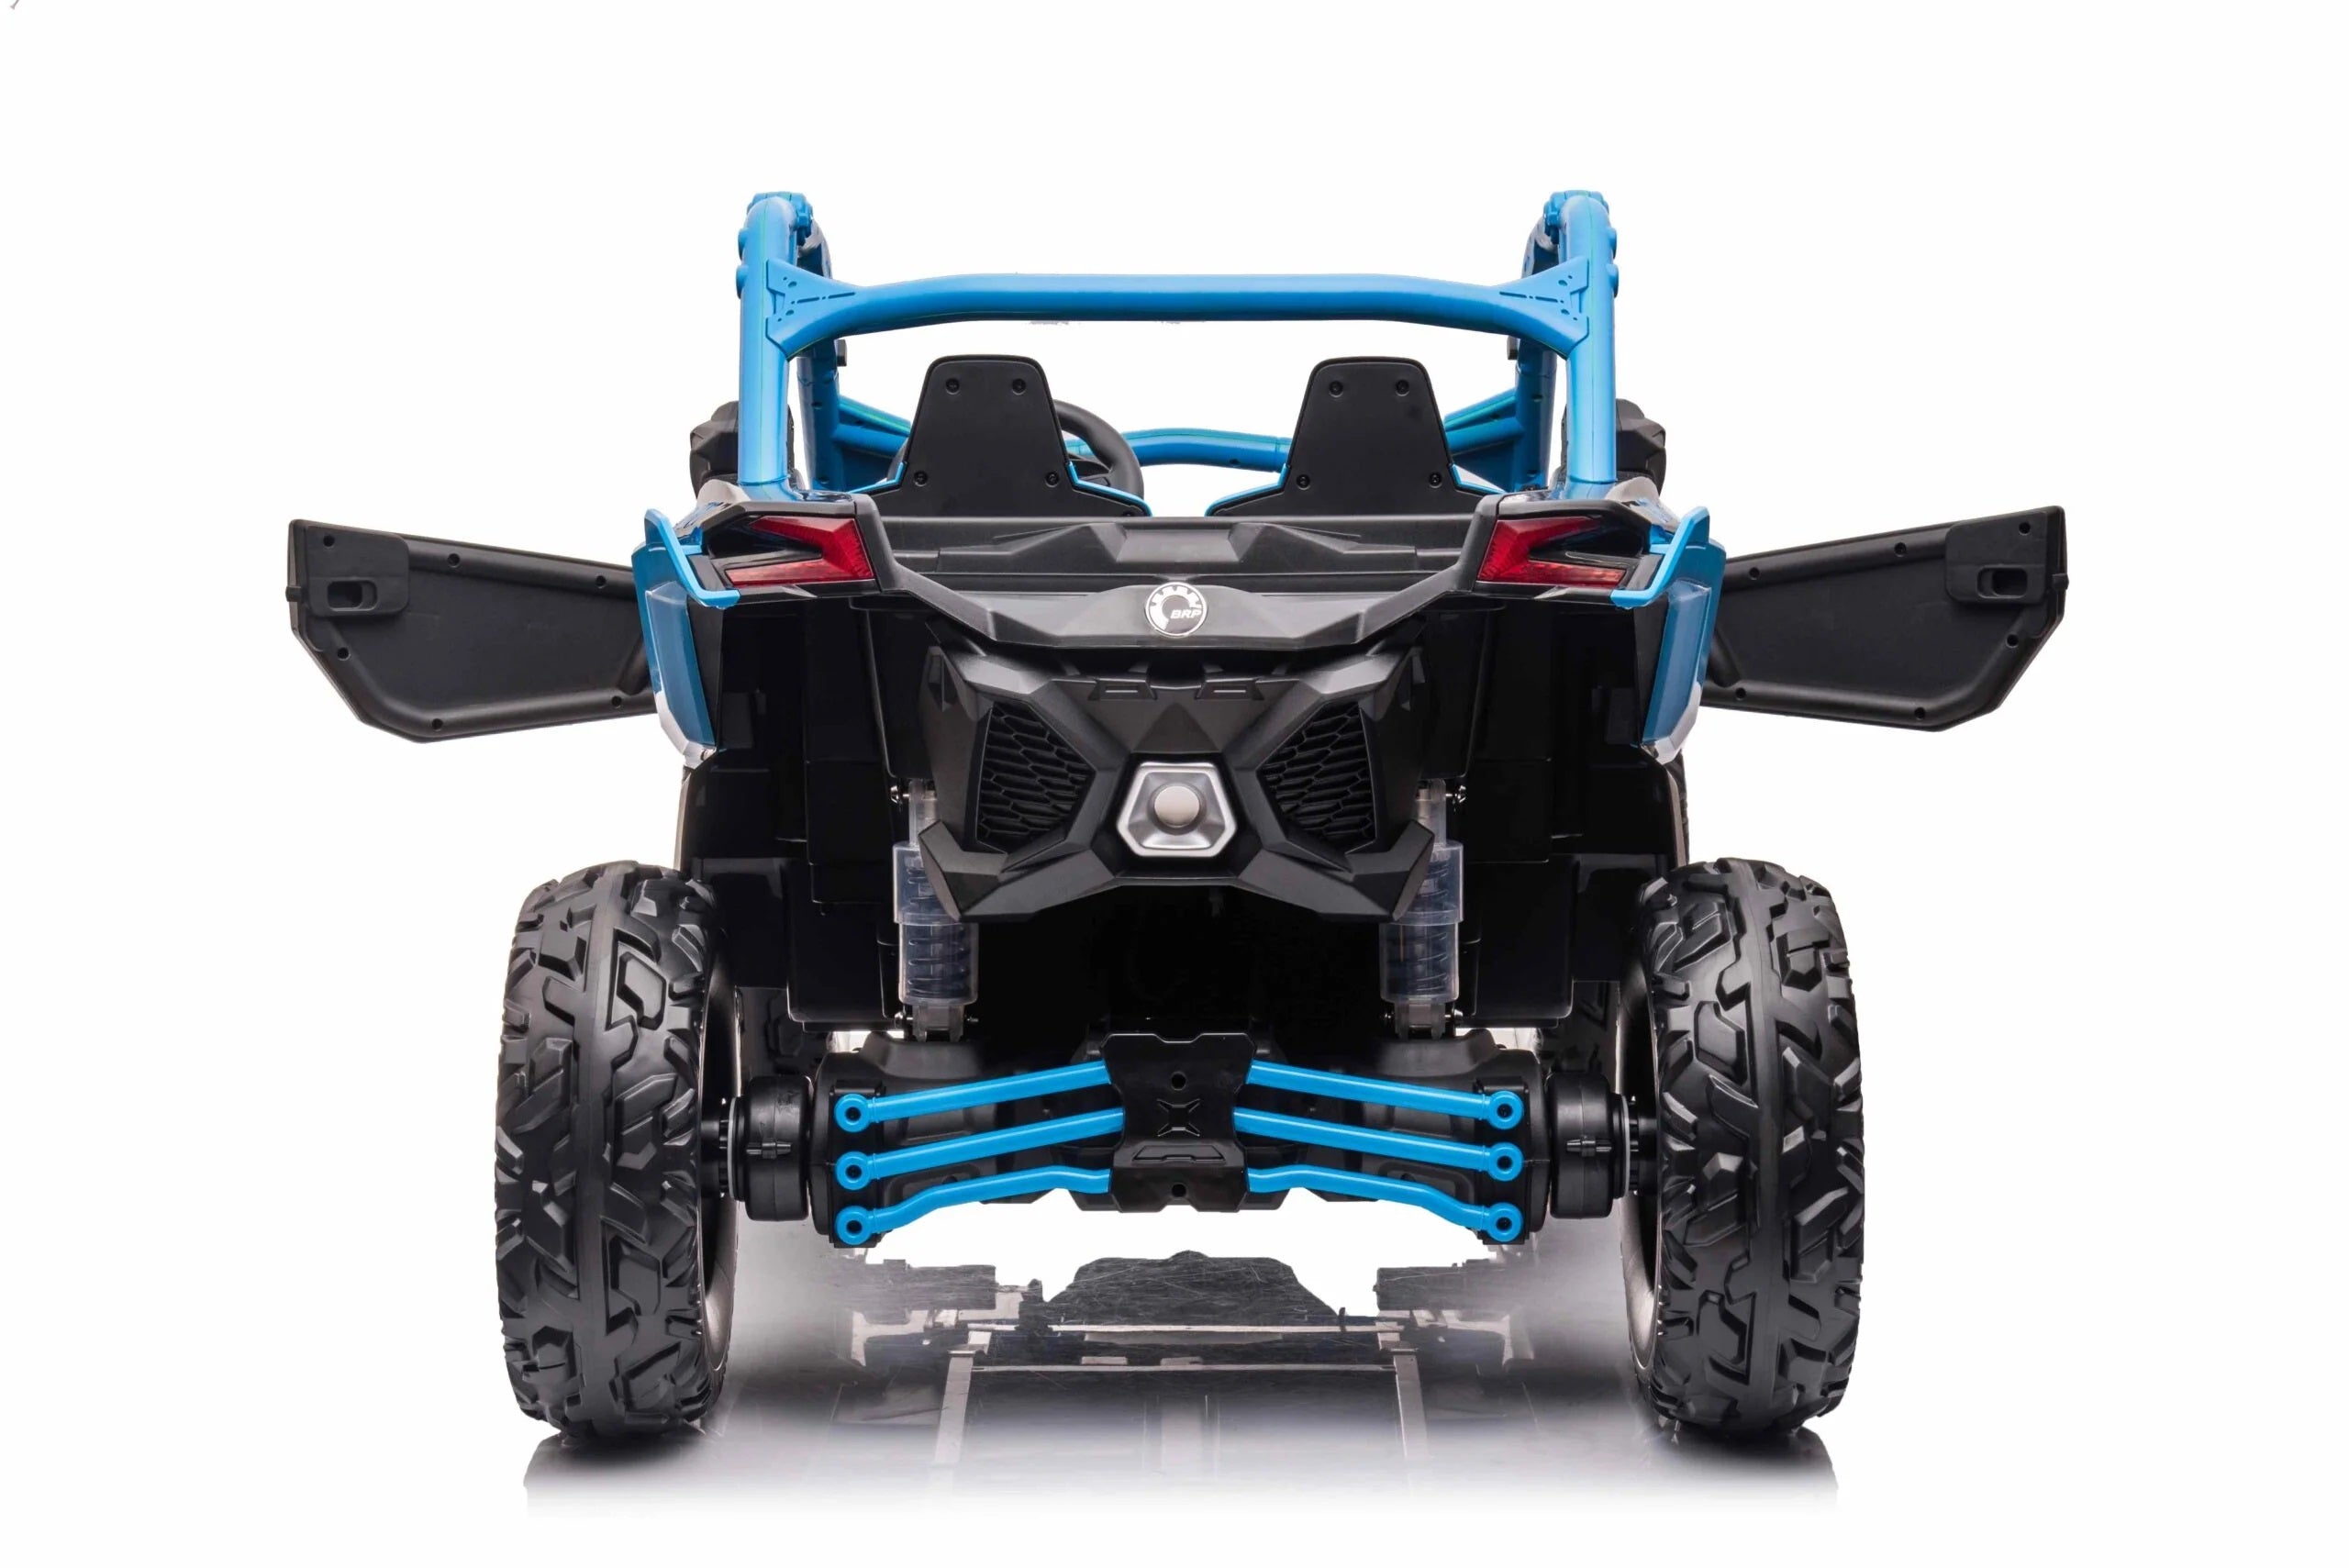 Rev Up the Fun: LX Performance Can-Am Maverick 4WD Edition 2-Seater Kids Ride-on Buggy with Leather Seats and RC Control